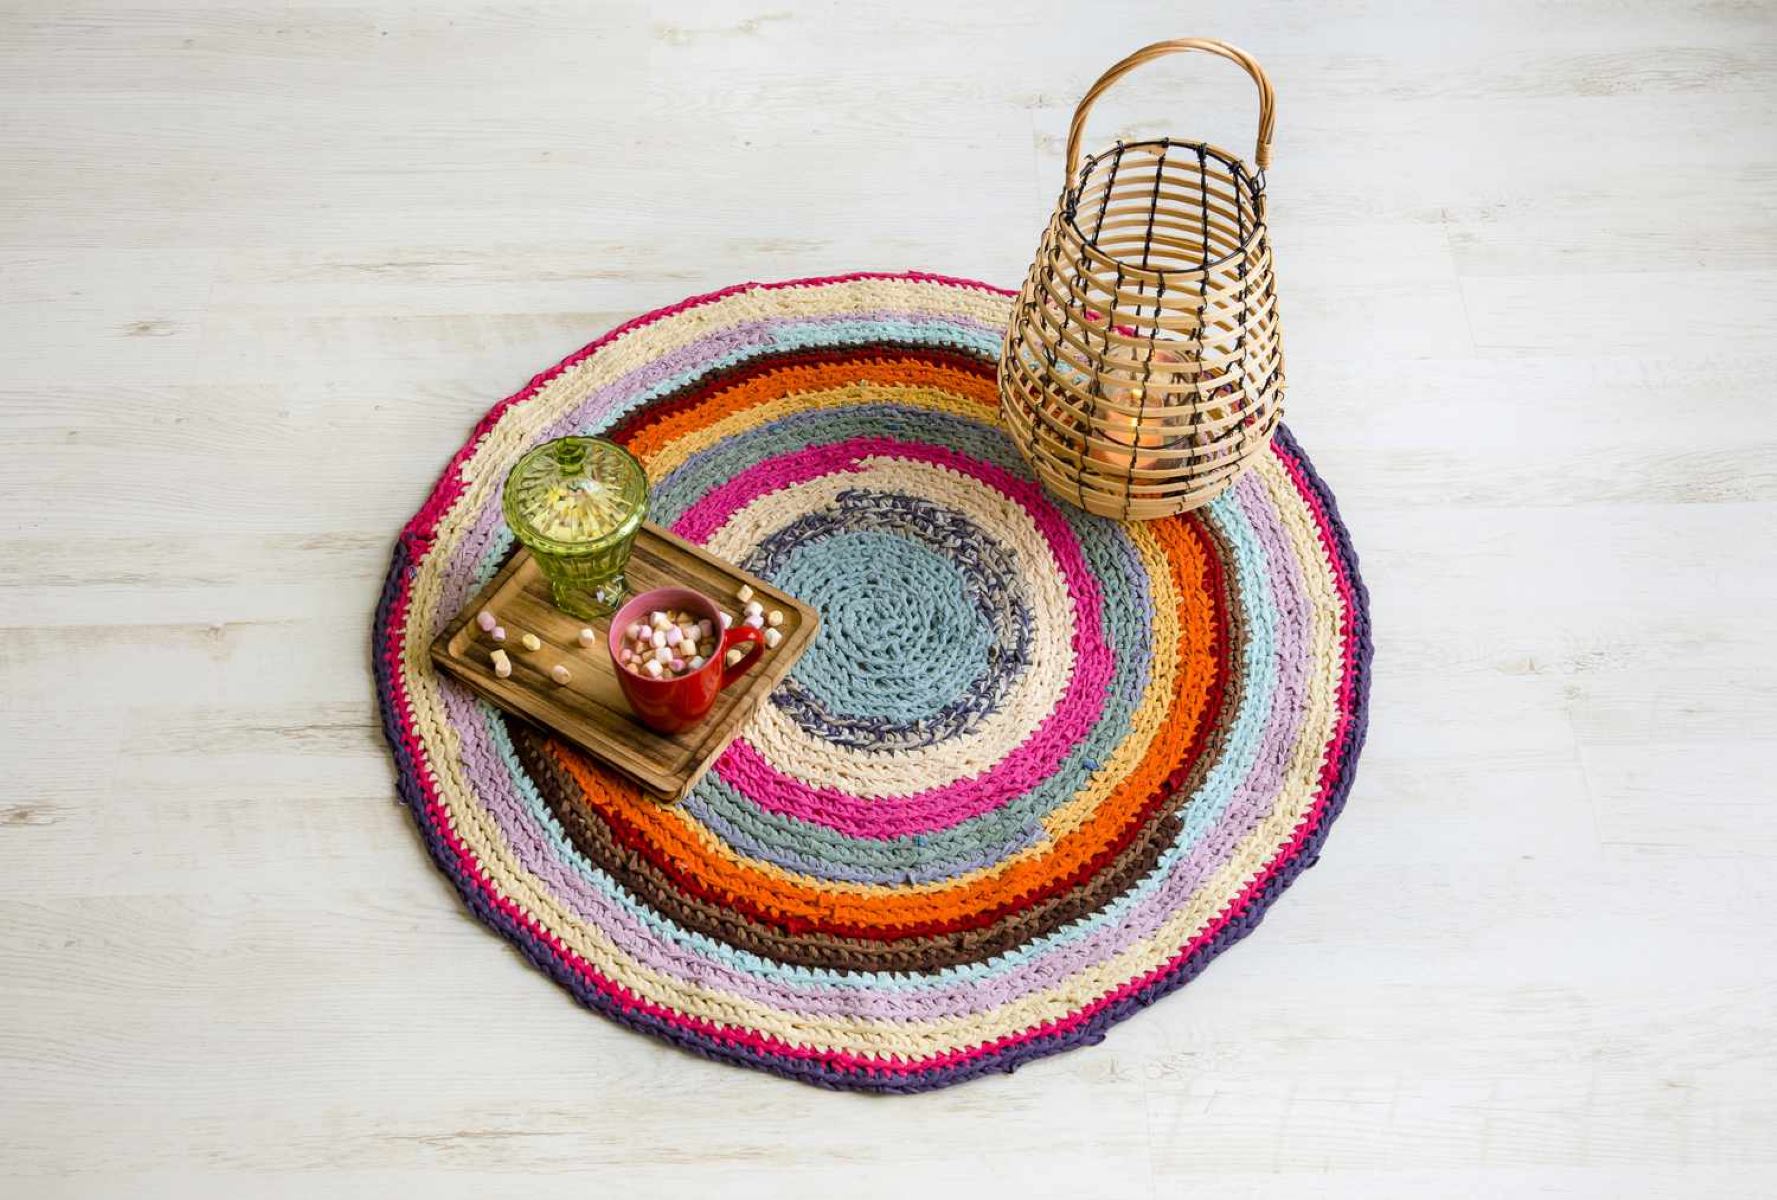 How To Make Rugs From Old Clothes